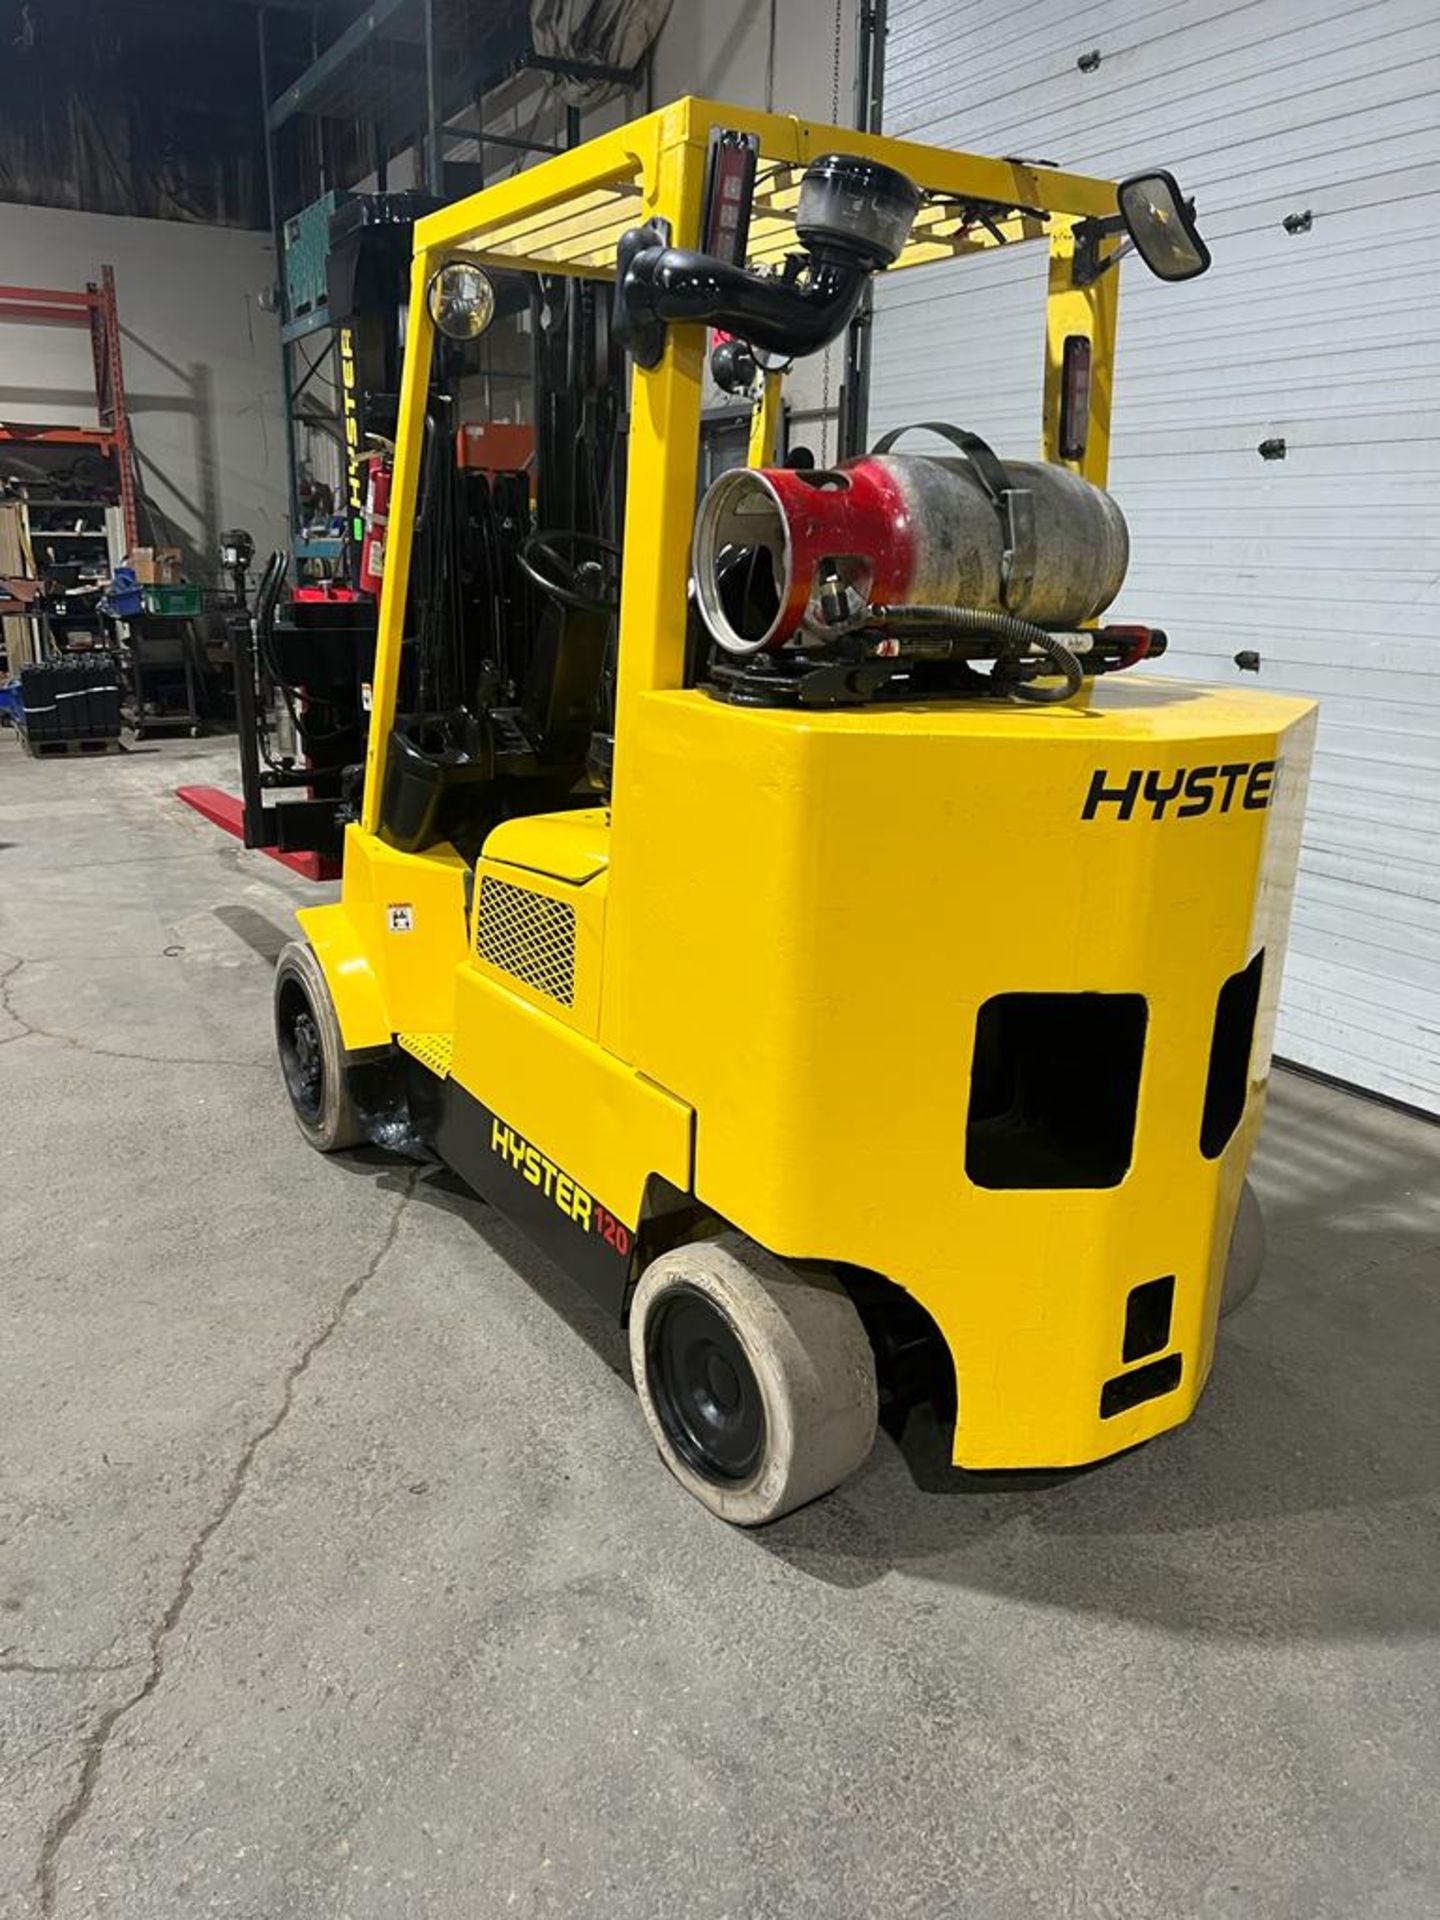 NICE Hyster 12,000lbs Capacity Forklift NEW 72" Forks Box Car Special LPG (Propane) - Image 3 of 3